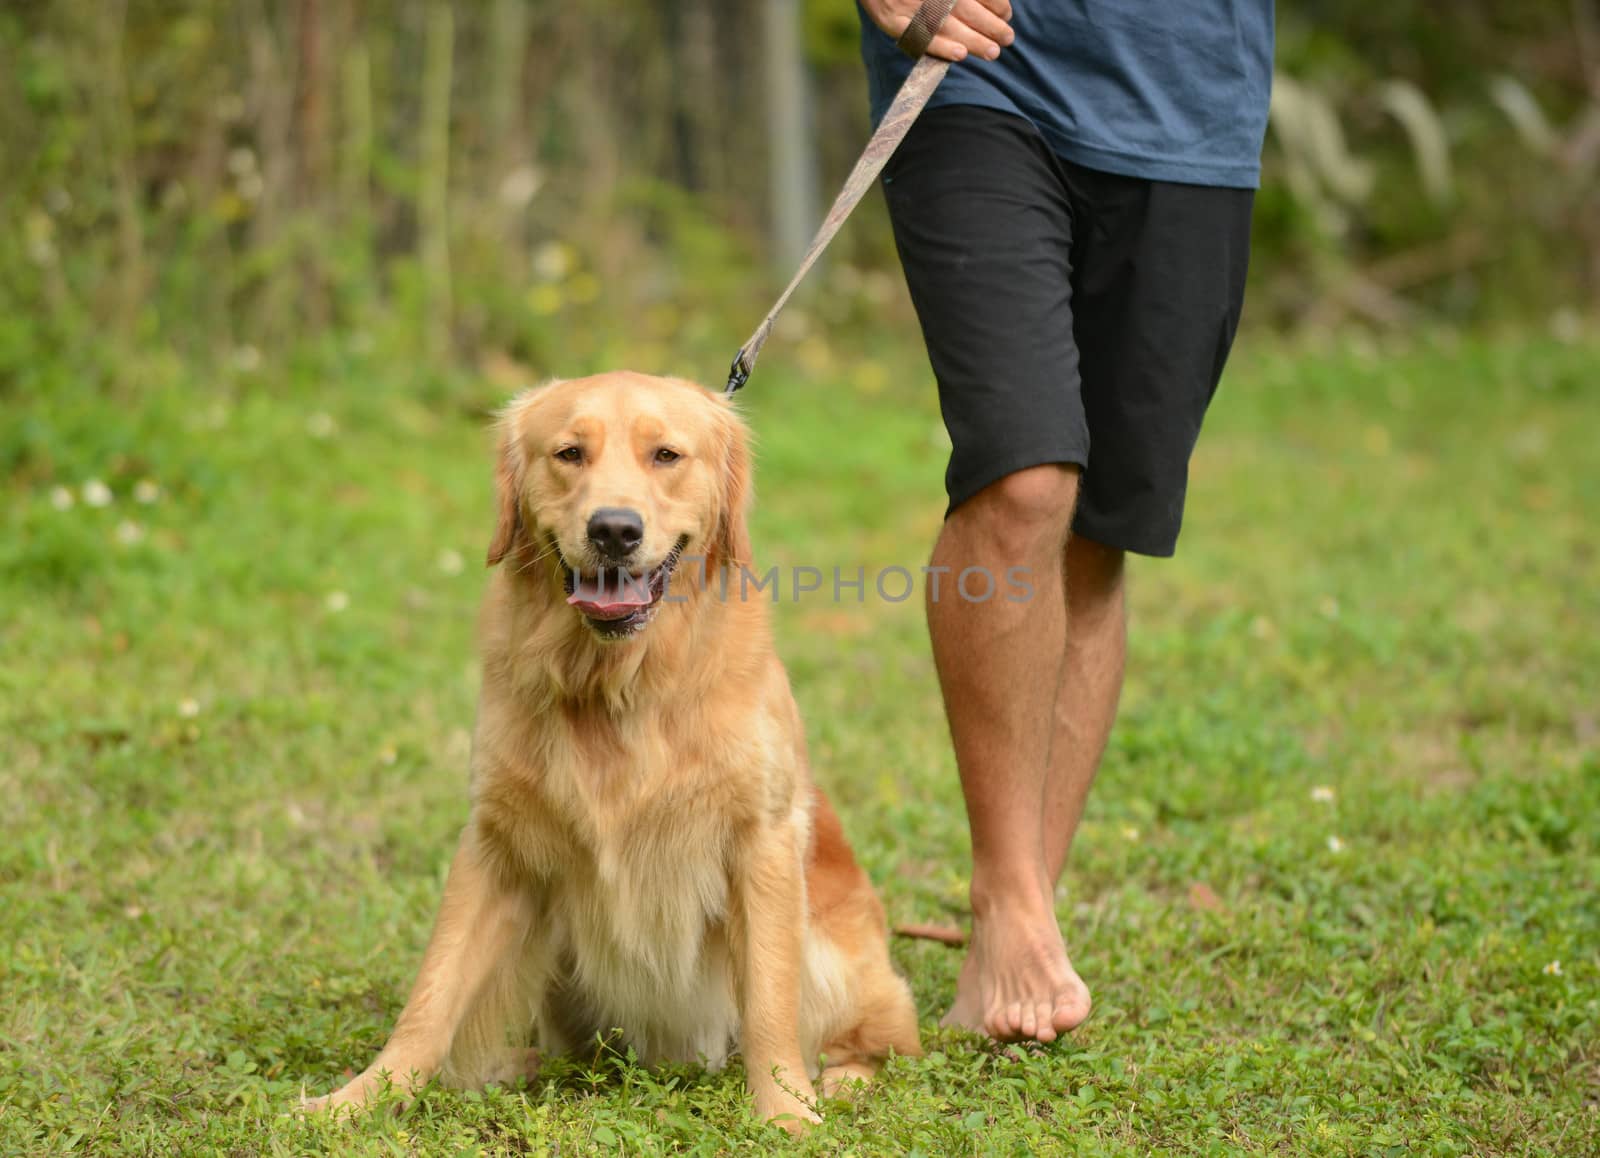 taking dog for walk by ftlaudgirl